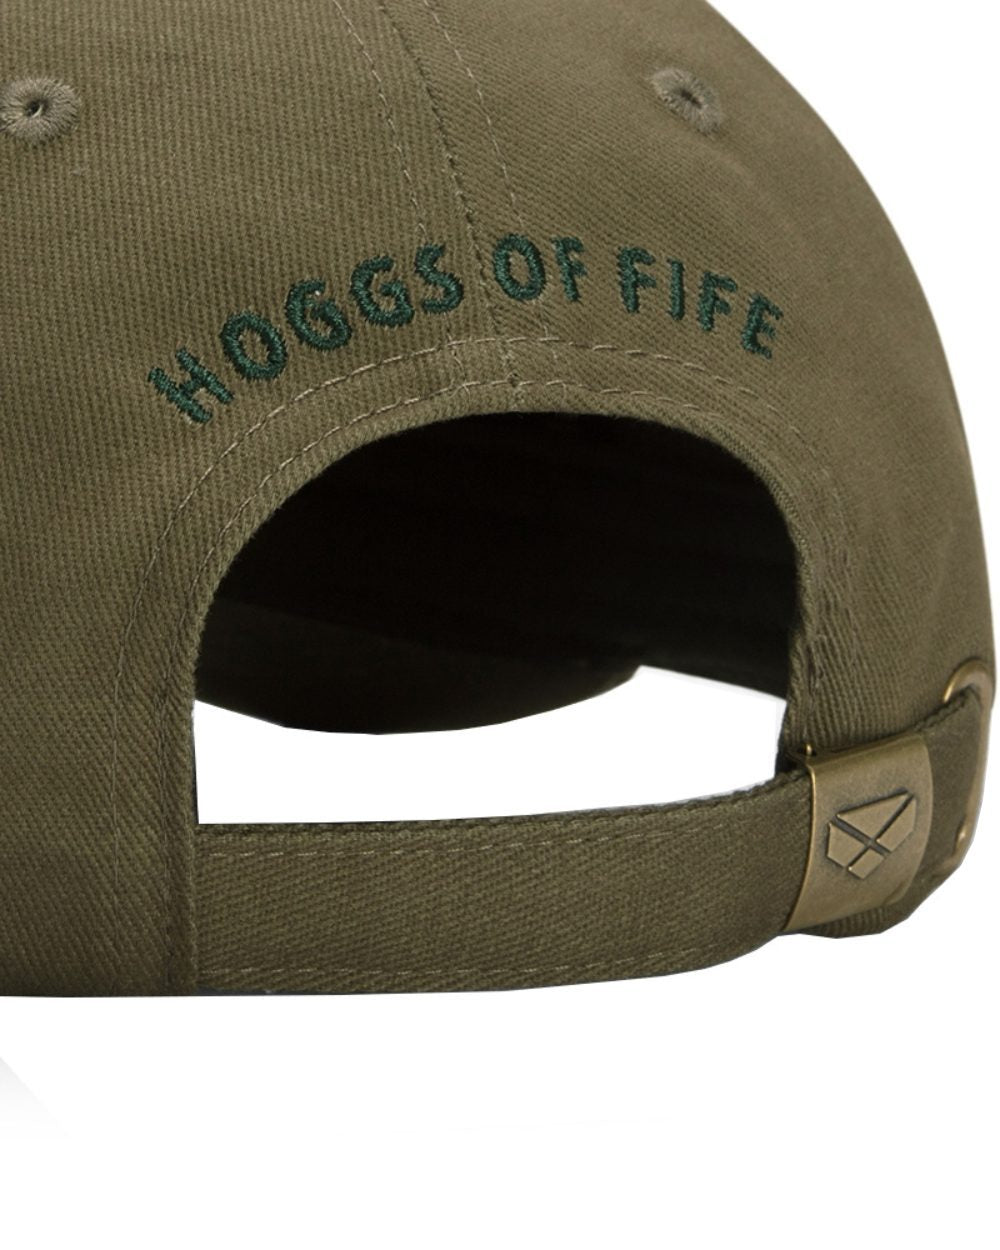 Olive Coloured Hoggs of Fife 1888 Baseball Cap On A White Background 